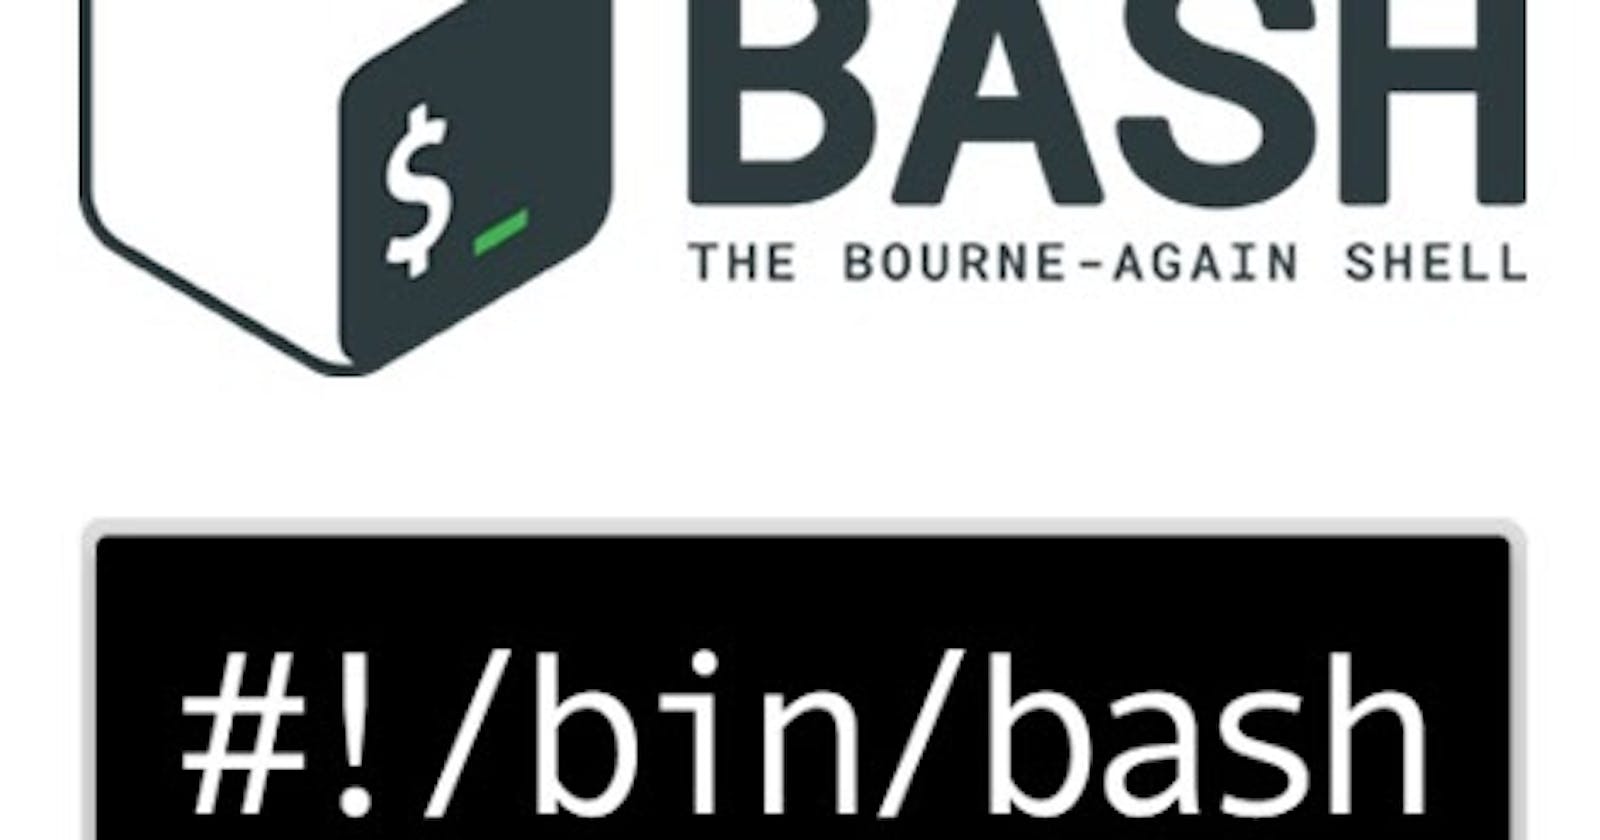 Comparing two files using a Bash script